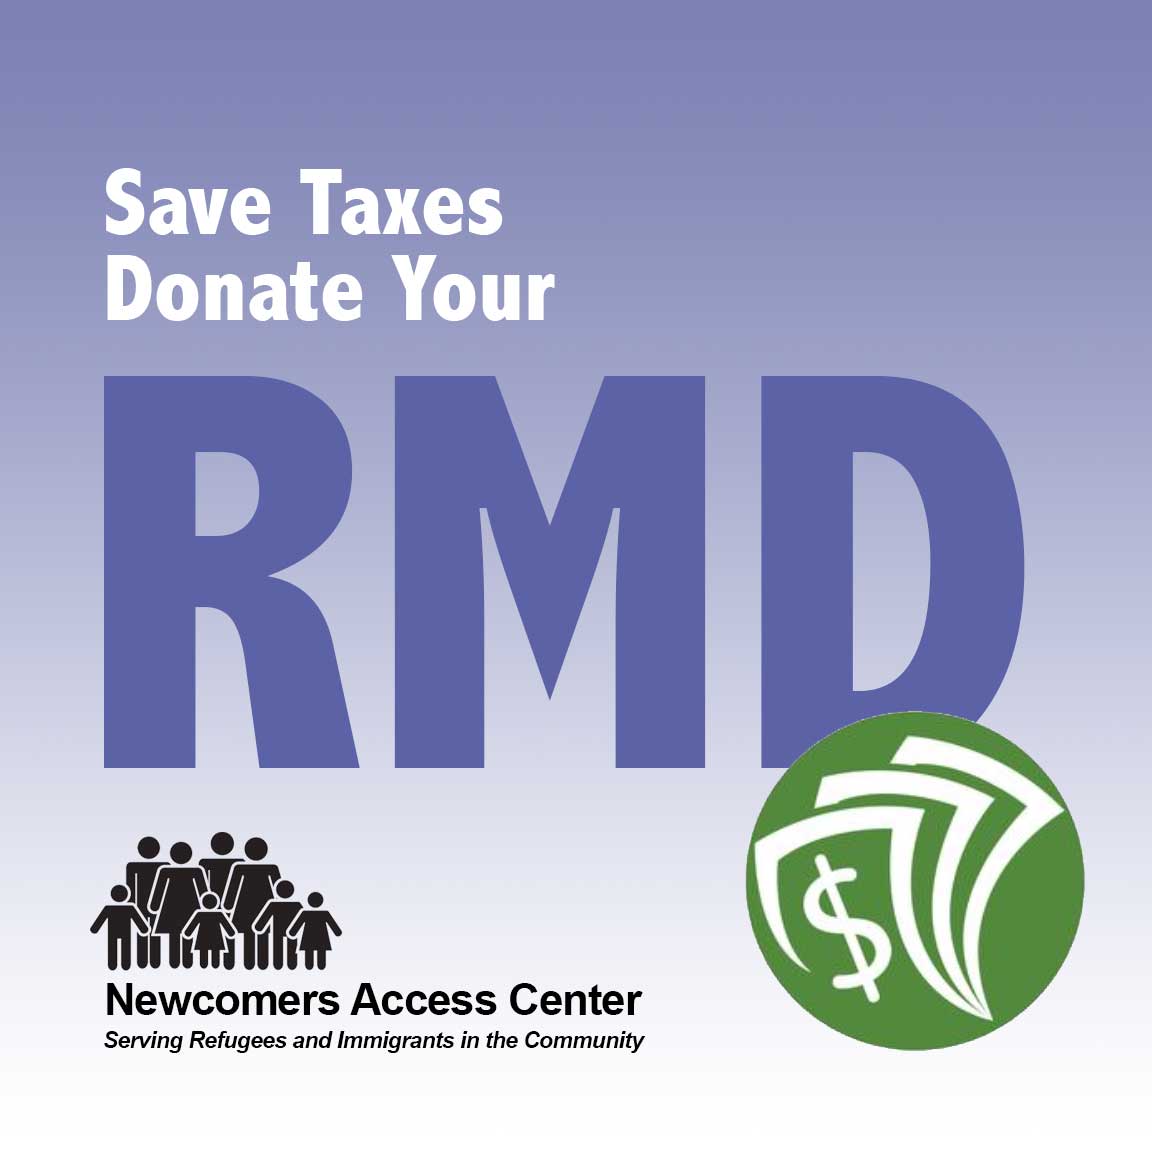 Stretch Charitable Dollars by Using RMD